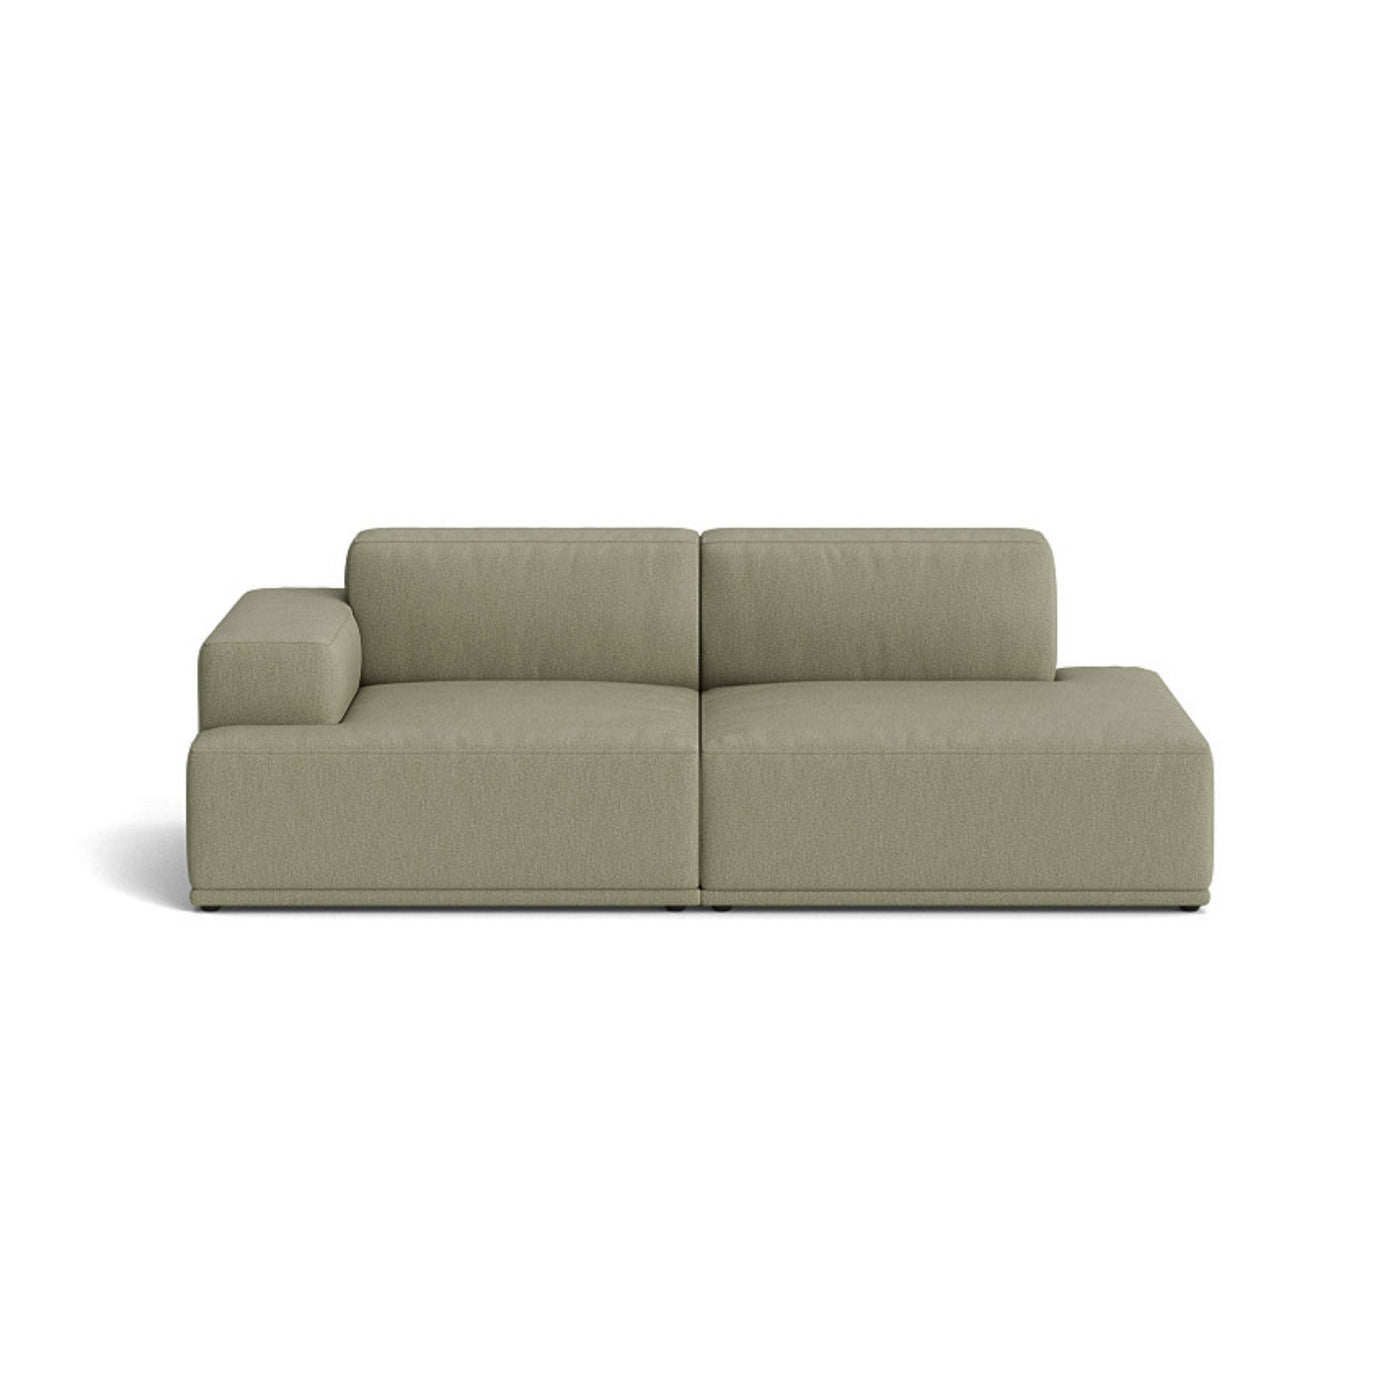 Muuto Connect Soft Modular 2 Seater Sofa, configuration 2. made-to-order from someday designs. #colour_clay-15